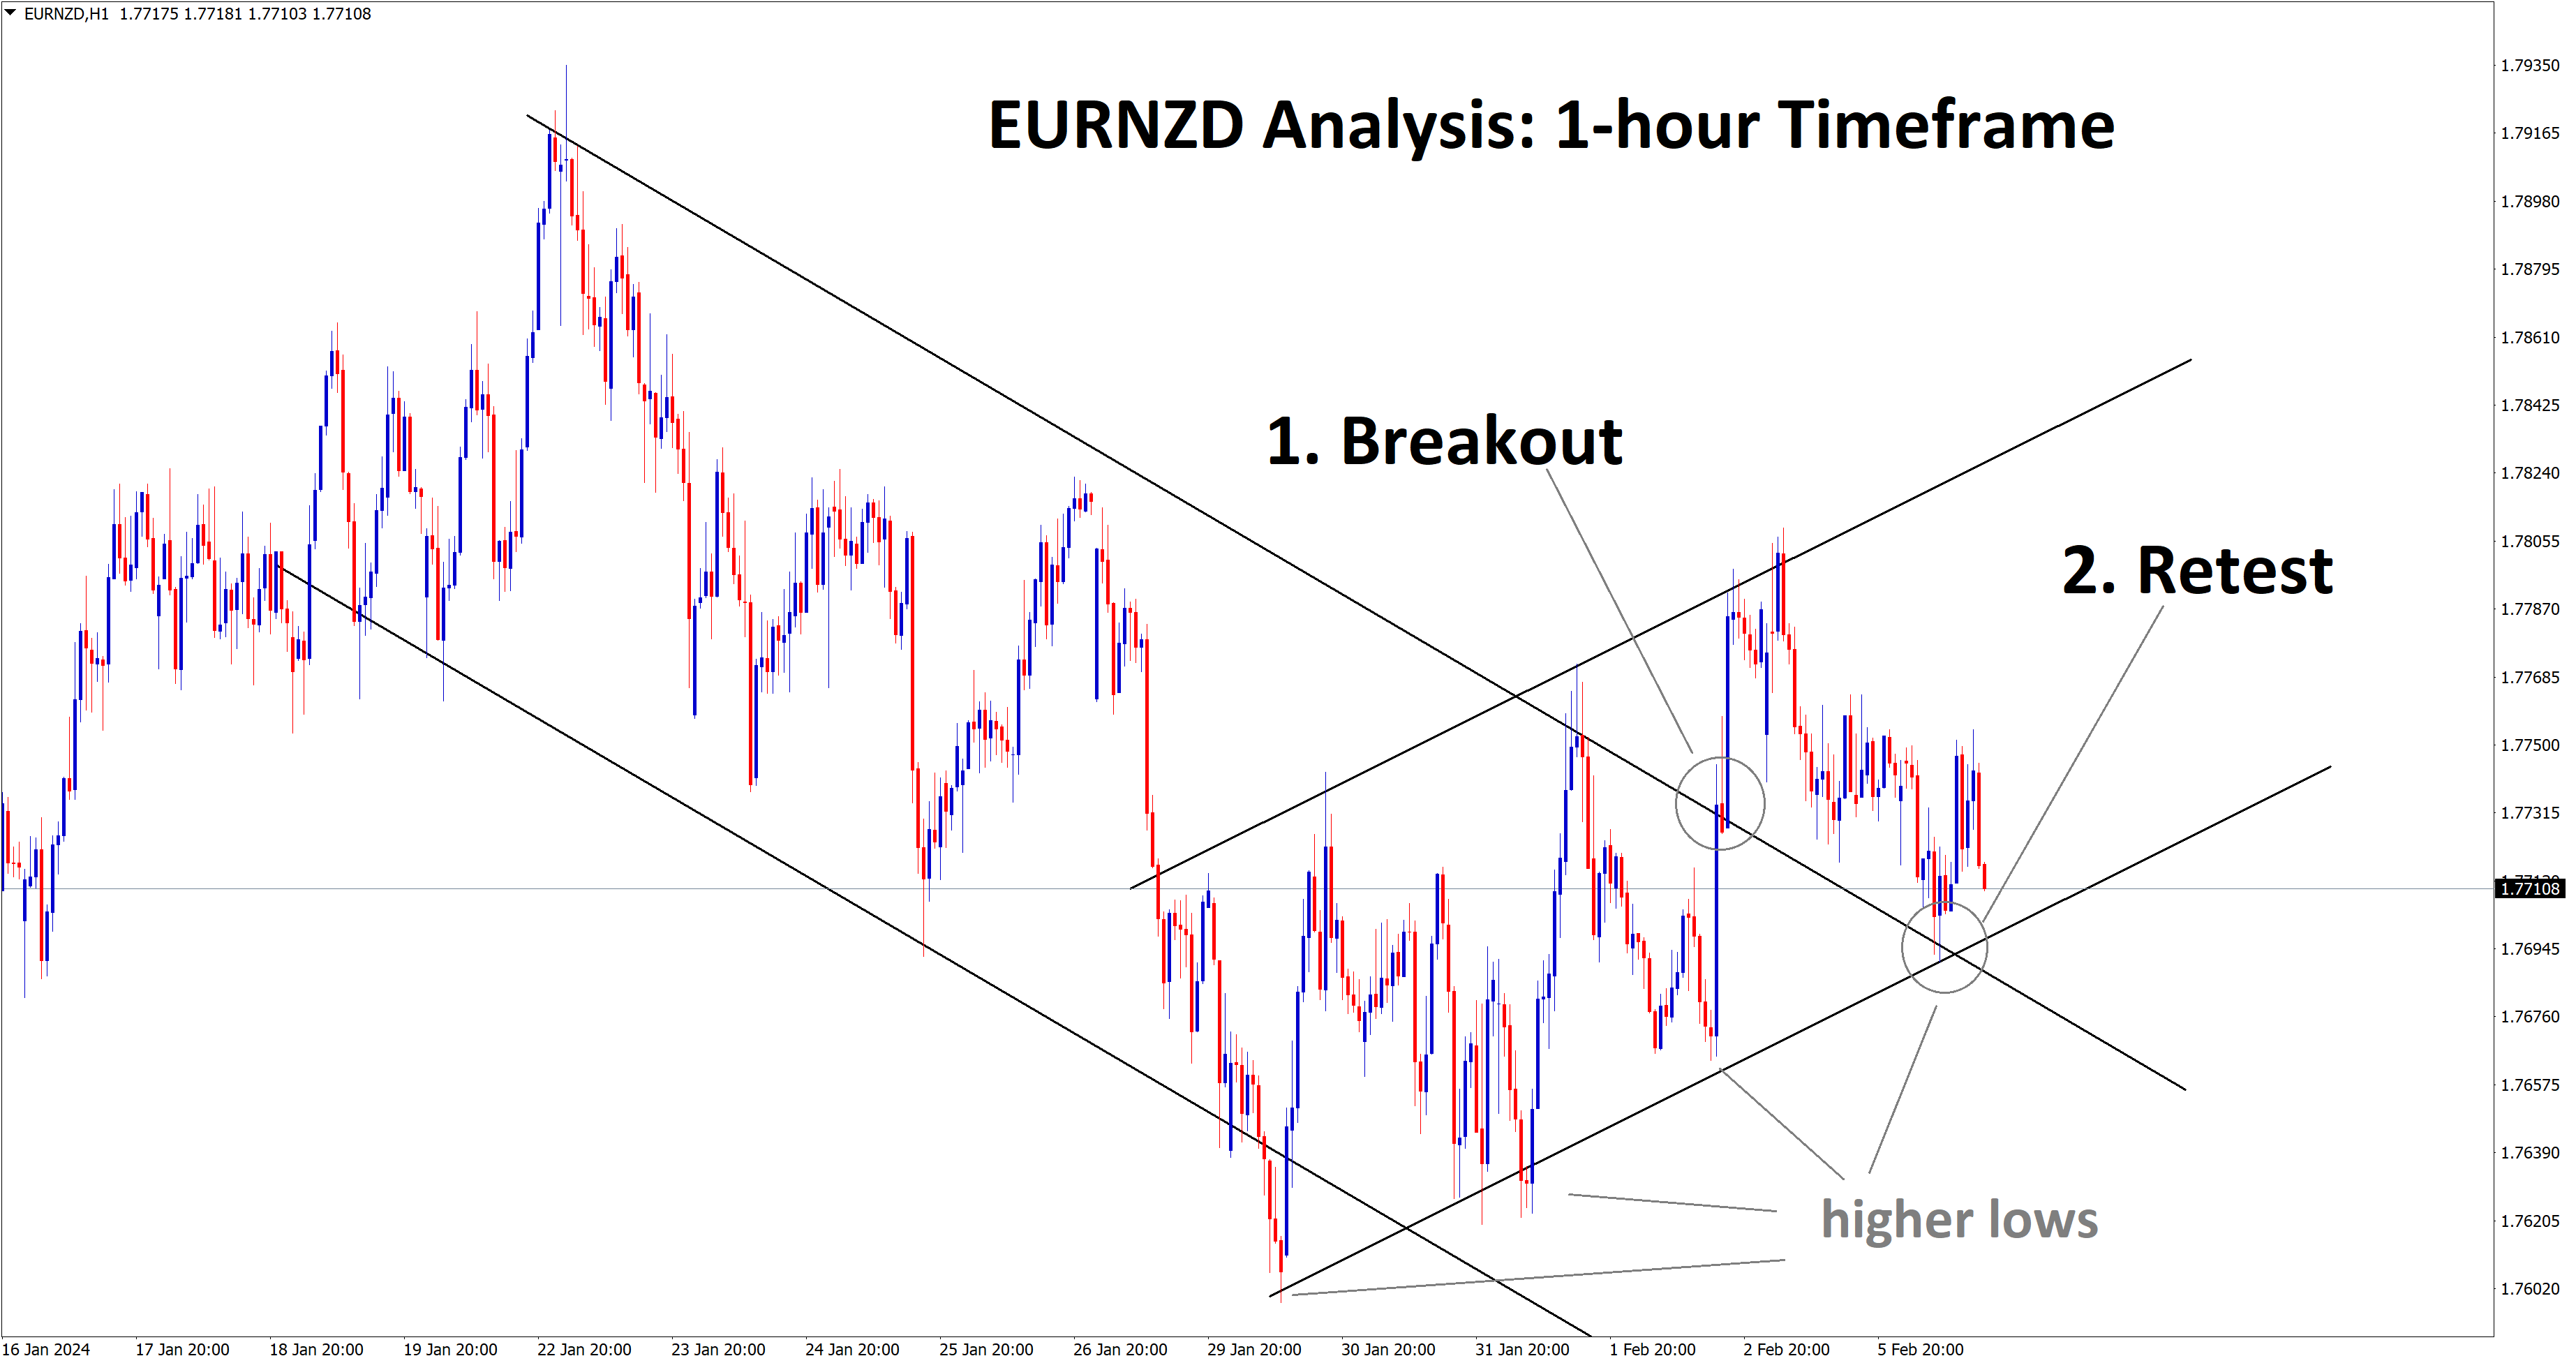 EURNZD at the low and retest area